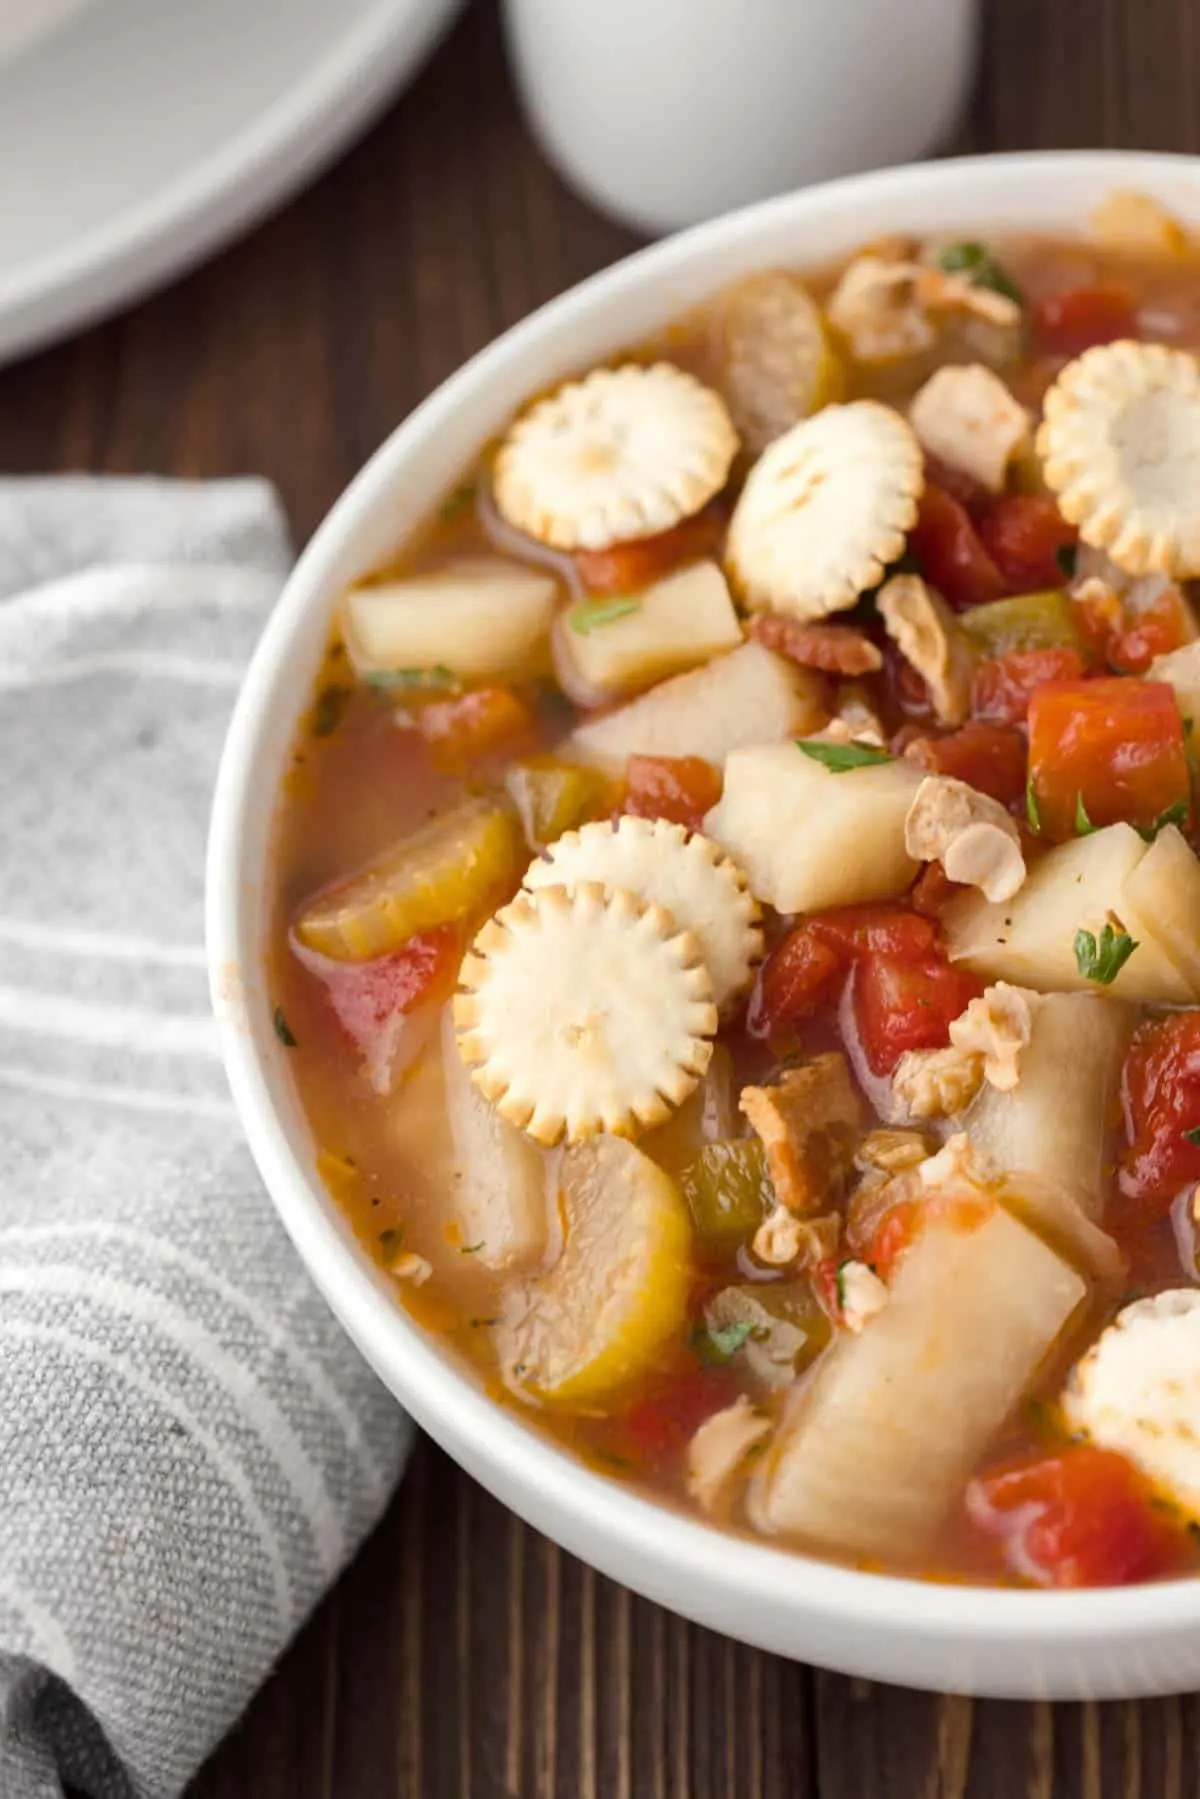 Manhattan Clam Chowder is a hearty soup loaded with chopped clams, diced tomatoes, potatoes, celery and chopped bacon all in a flavourful tomato broth.